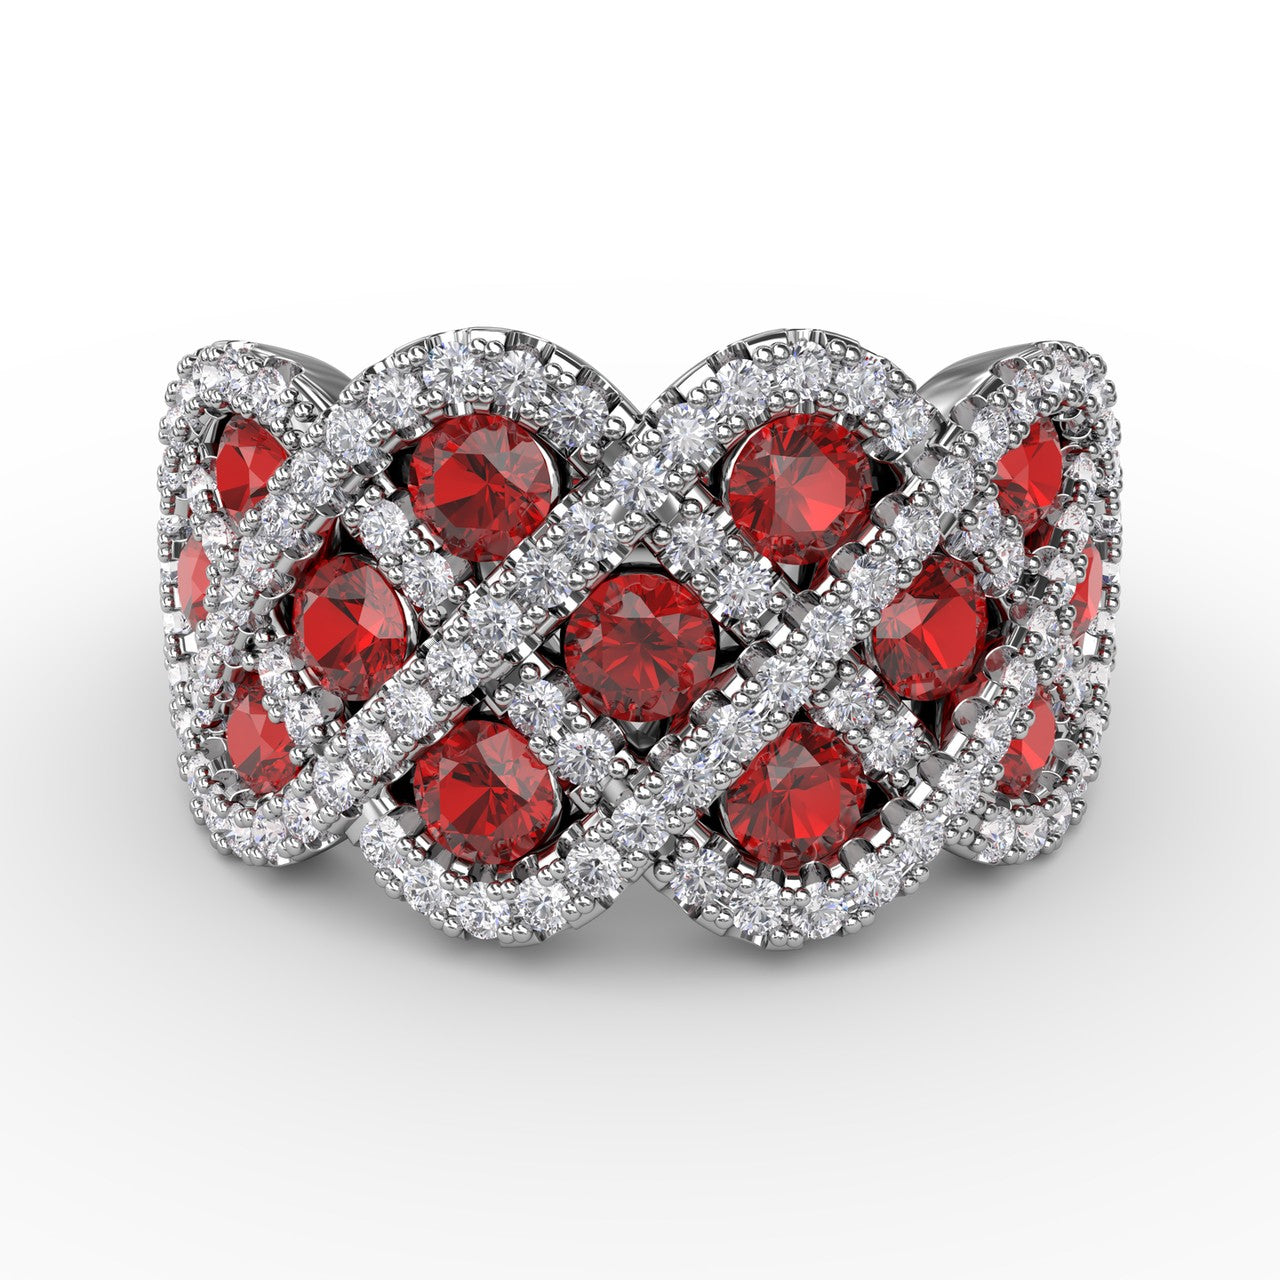 You And Me Ruby And Diamond Interweaving Ring